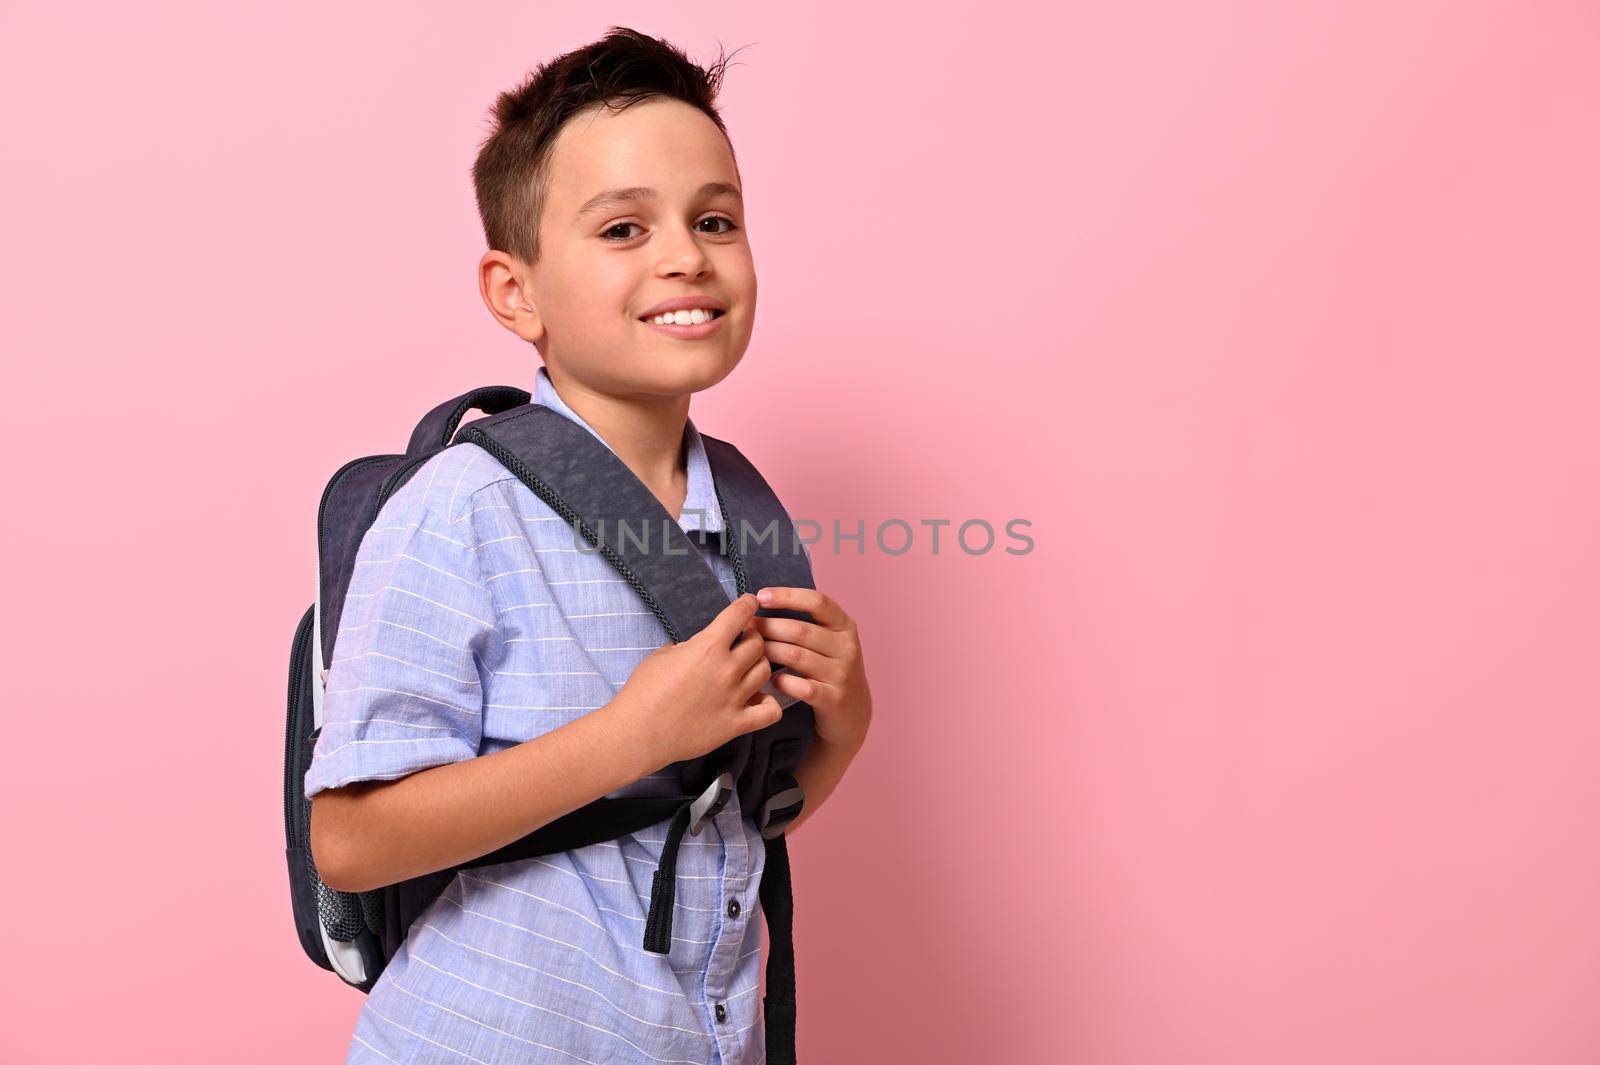 Side portrait of a smiling with toothy smile schoolboy with a school bag on his back on pink background with copy space. Back to school concepts by artgf